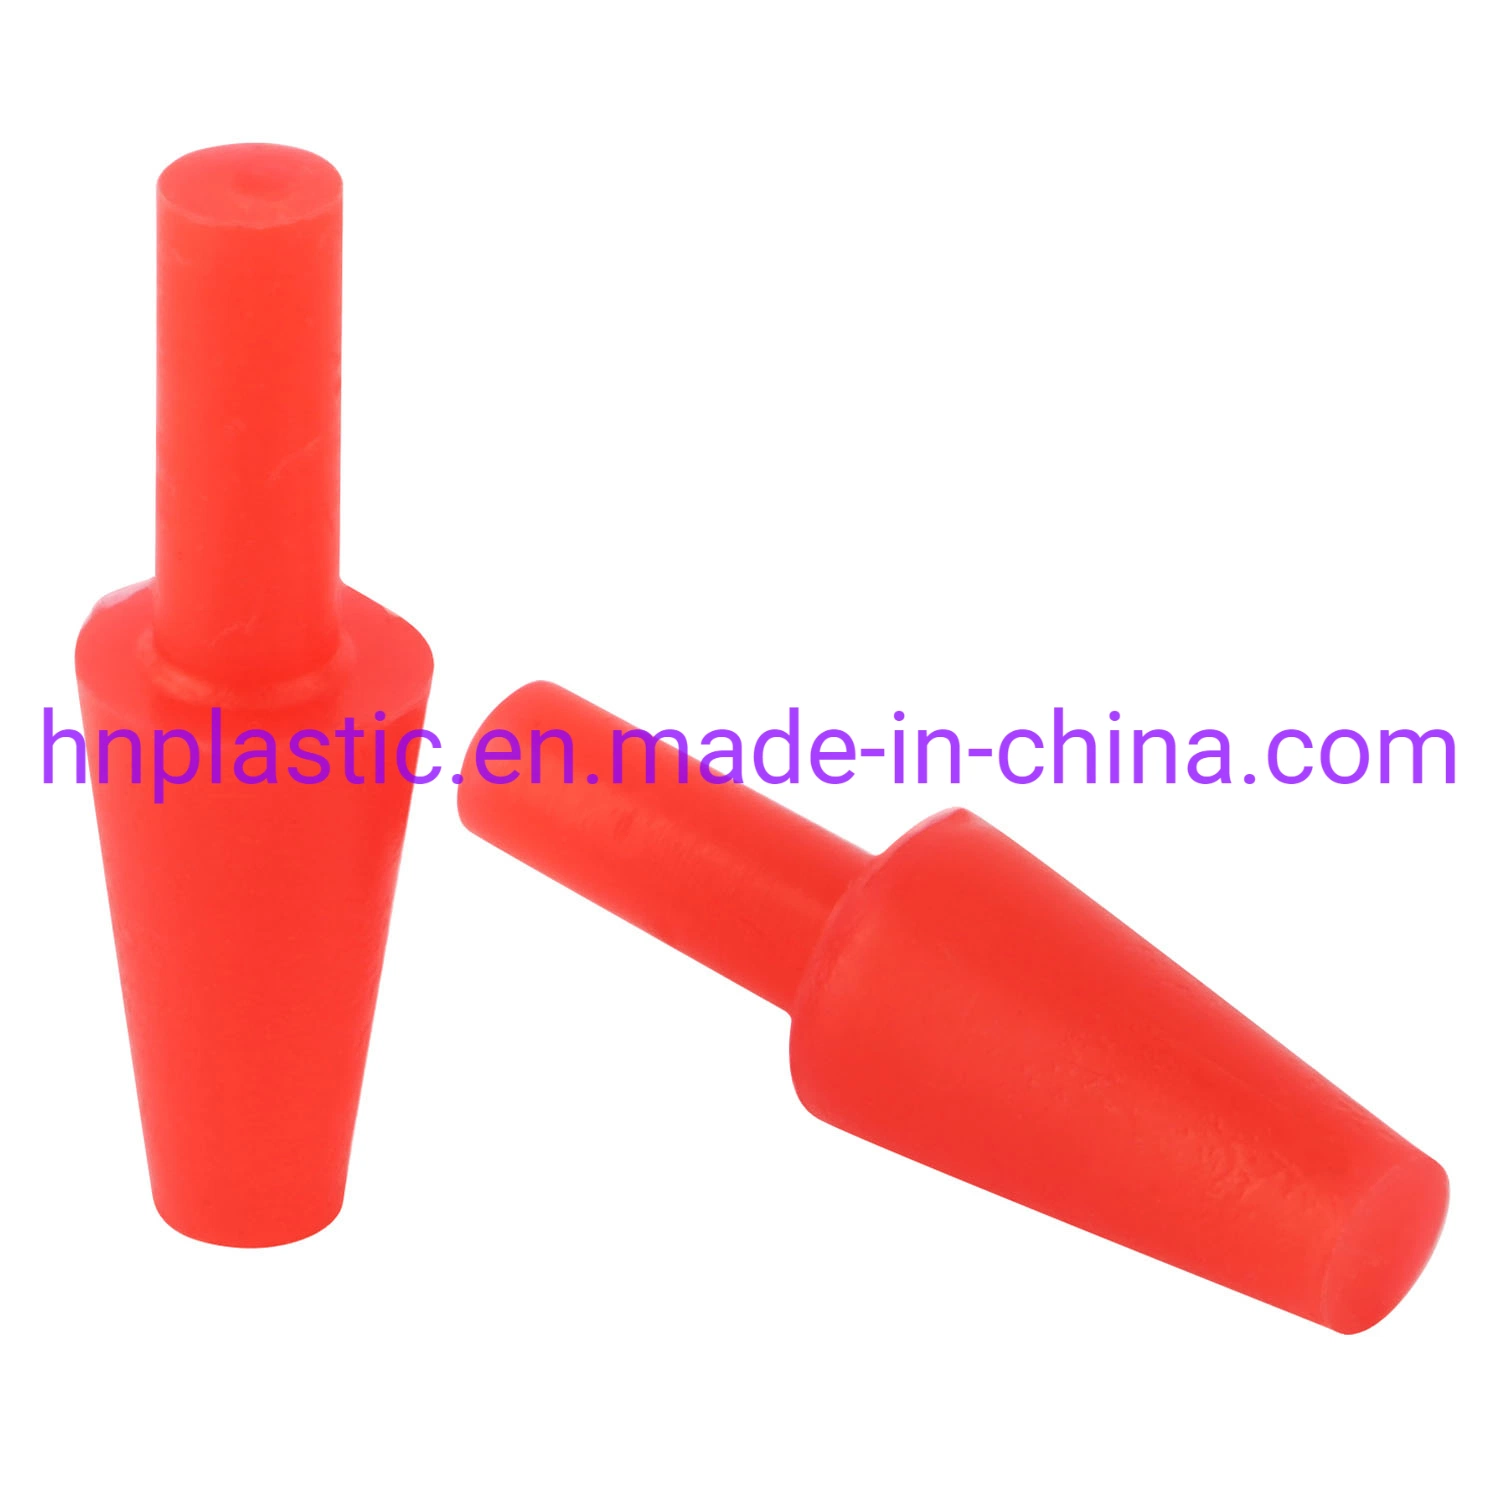 Silicone Rubber Plugs, Silicone Rubber Products for Coating